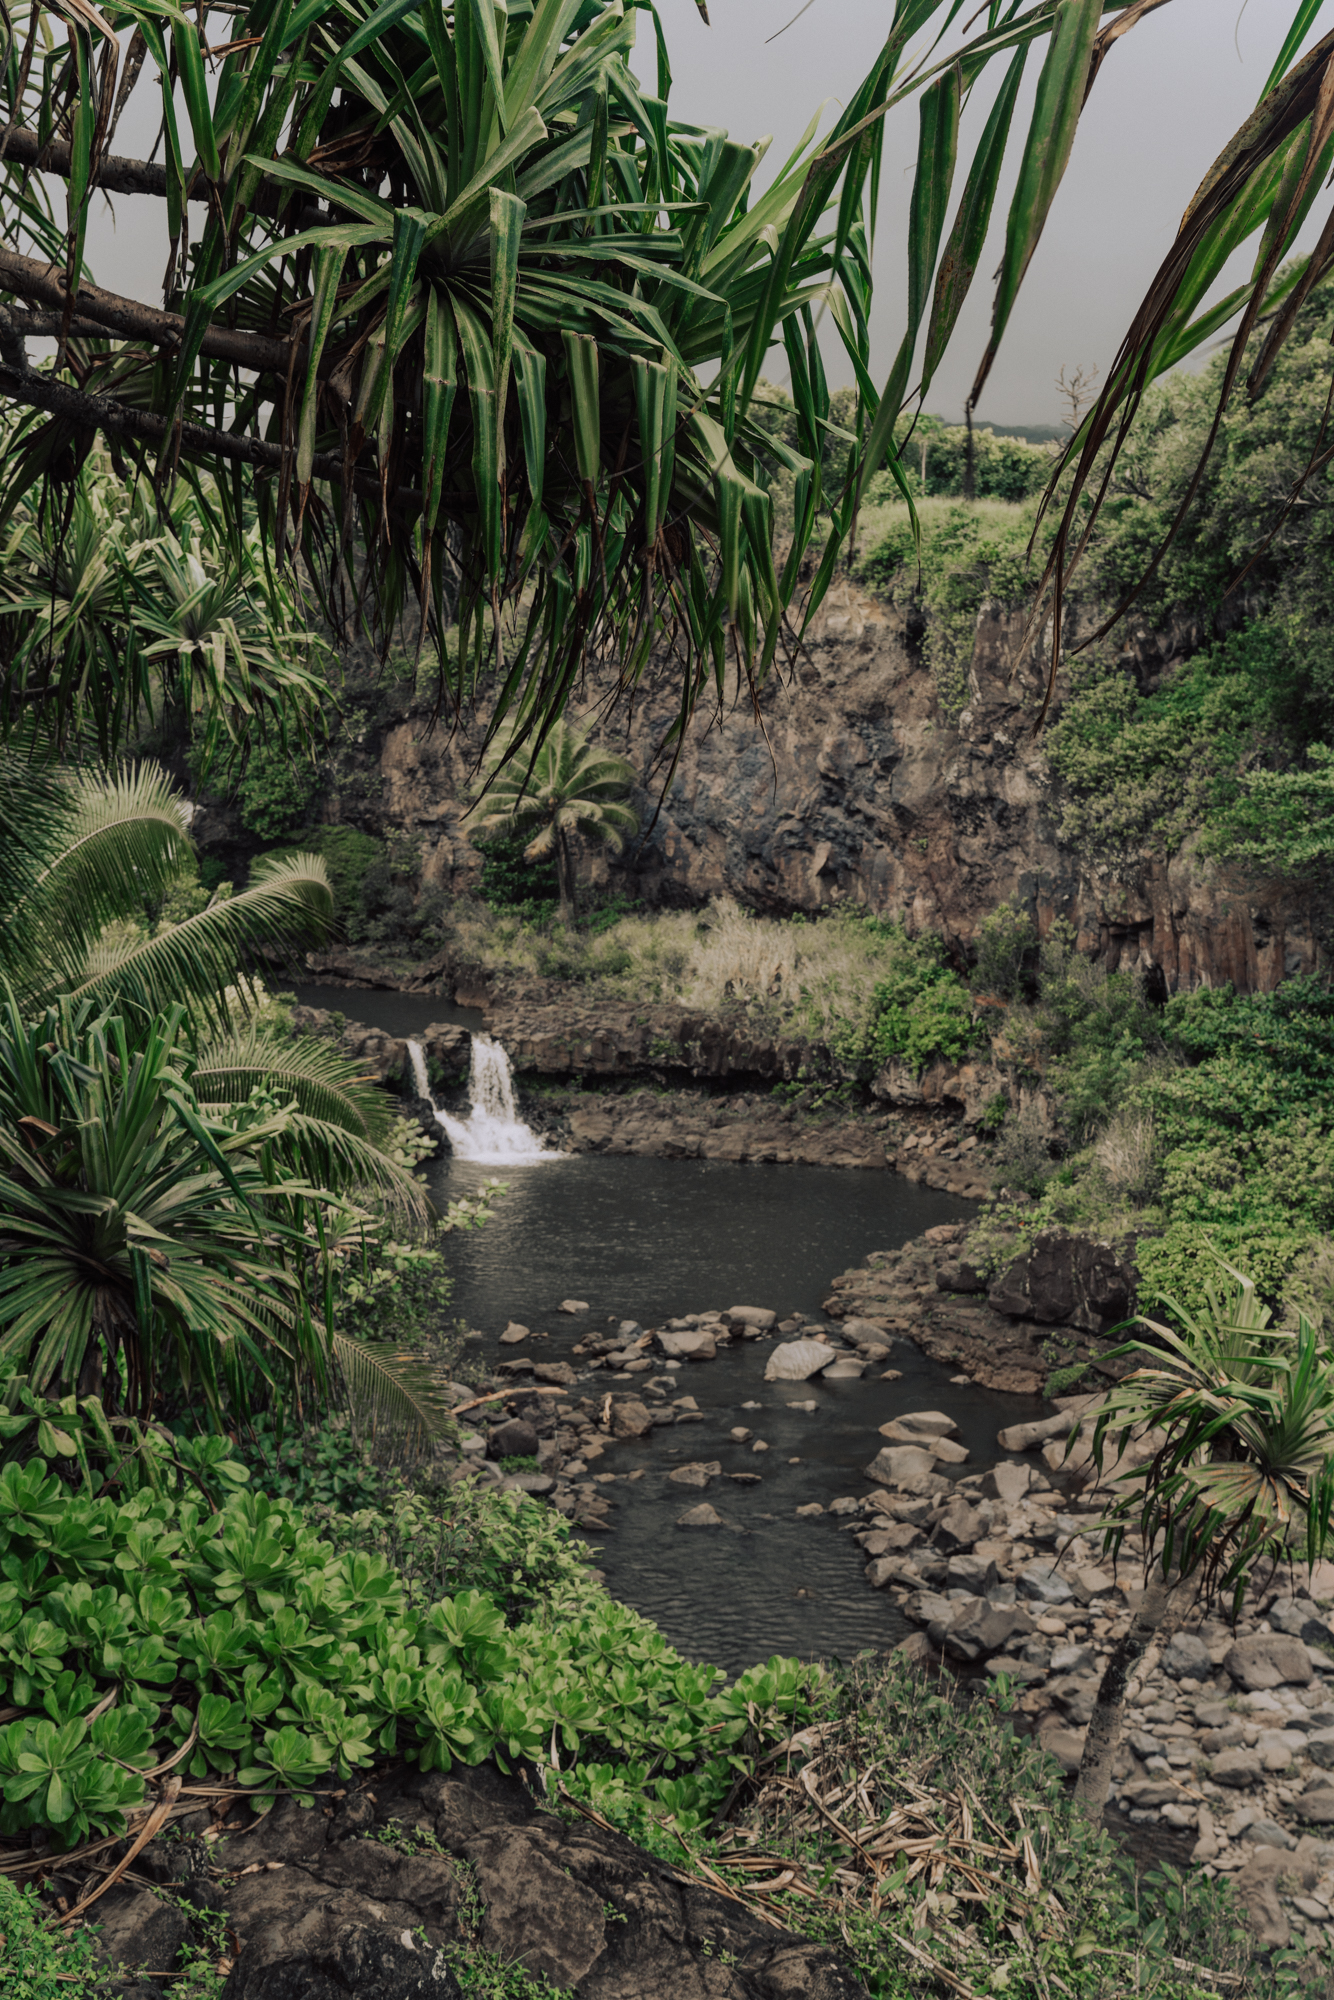 Water fall photo in a tropical setting with palm trees